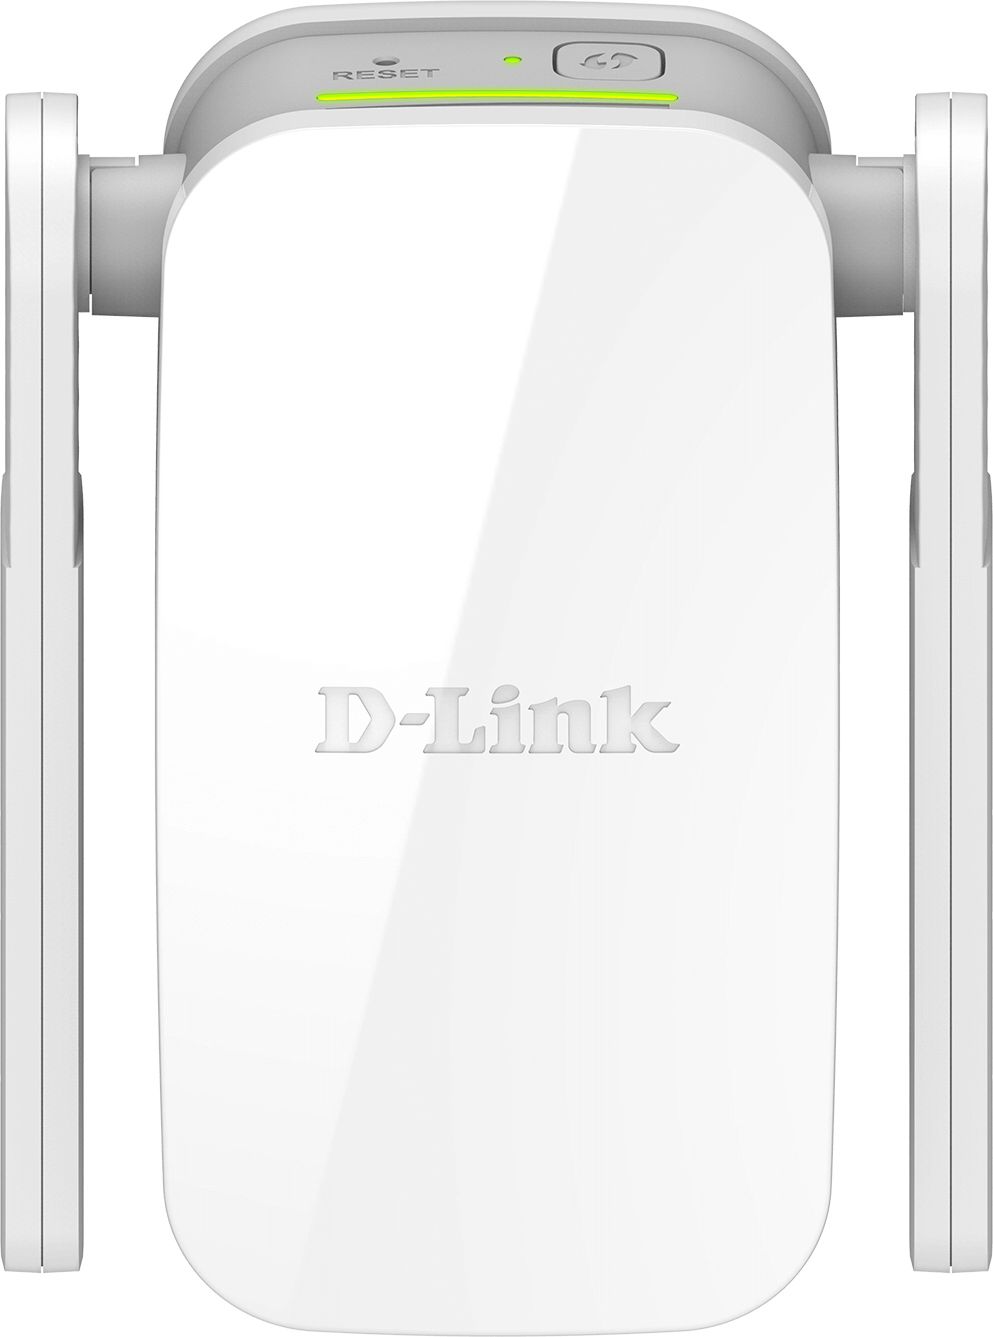 D-link Wireless AC1200 Dual Band Range Extender DAP-1610, with FE port; Compact Wall Plug design; External antenna design; 2x2 11ac Technology, Up to 1200 Mbps data rate; Complying with the IEEE 802.11 ac draft, a, n, g, and b; WPS (WiFi Protected Setup); WPA2/WPA wireless encryption; D-Link_1